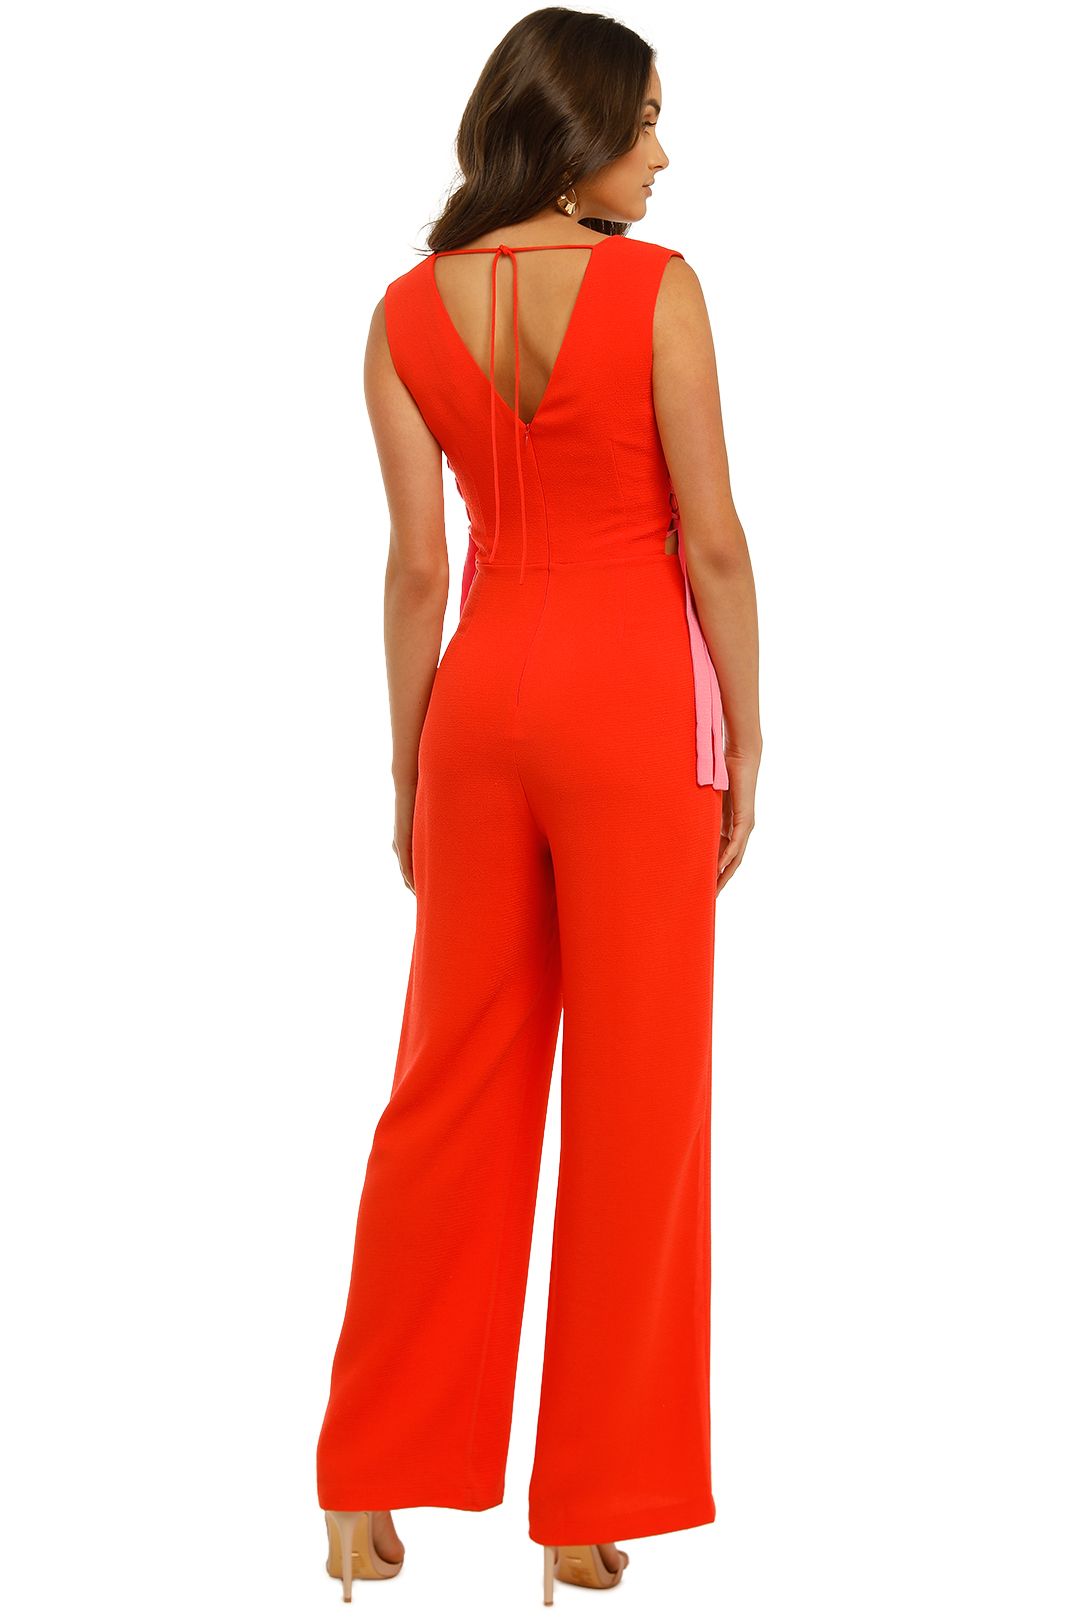 Dancing in Flames Jumpsuit in Red/Pink by Vestire for Hire | GlamCorner